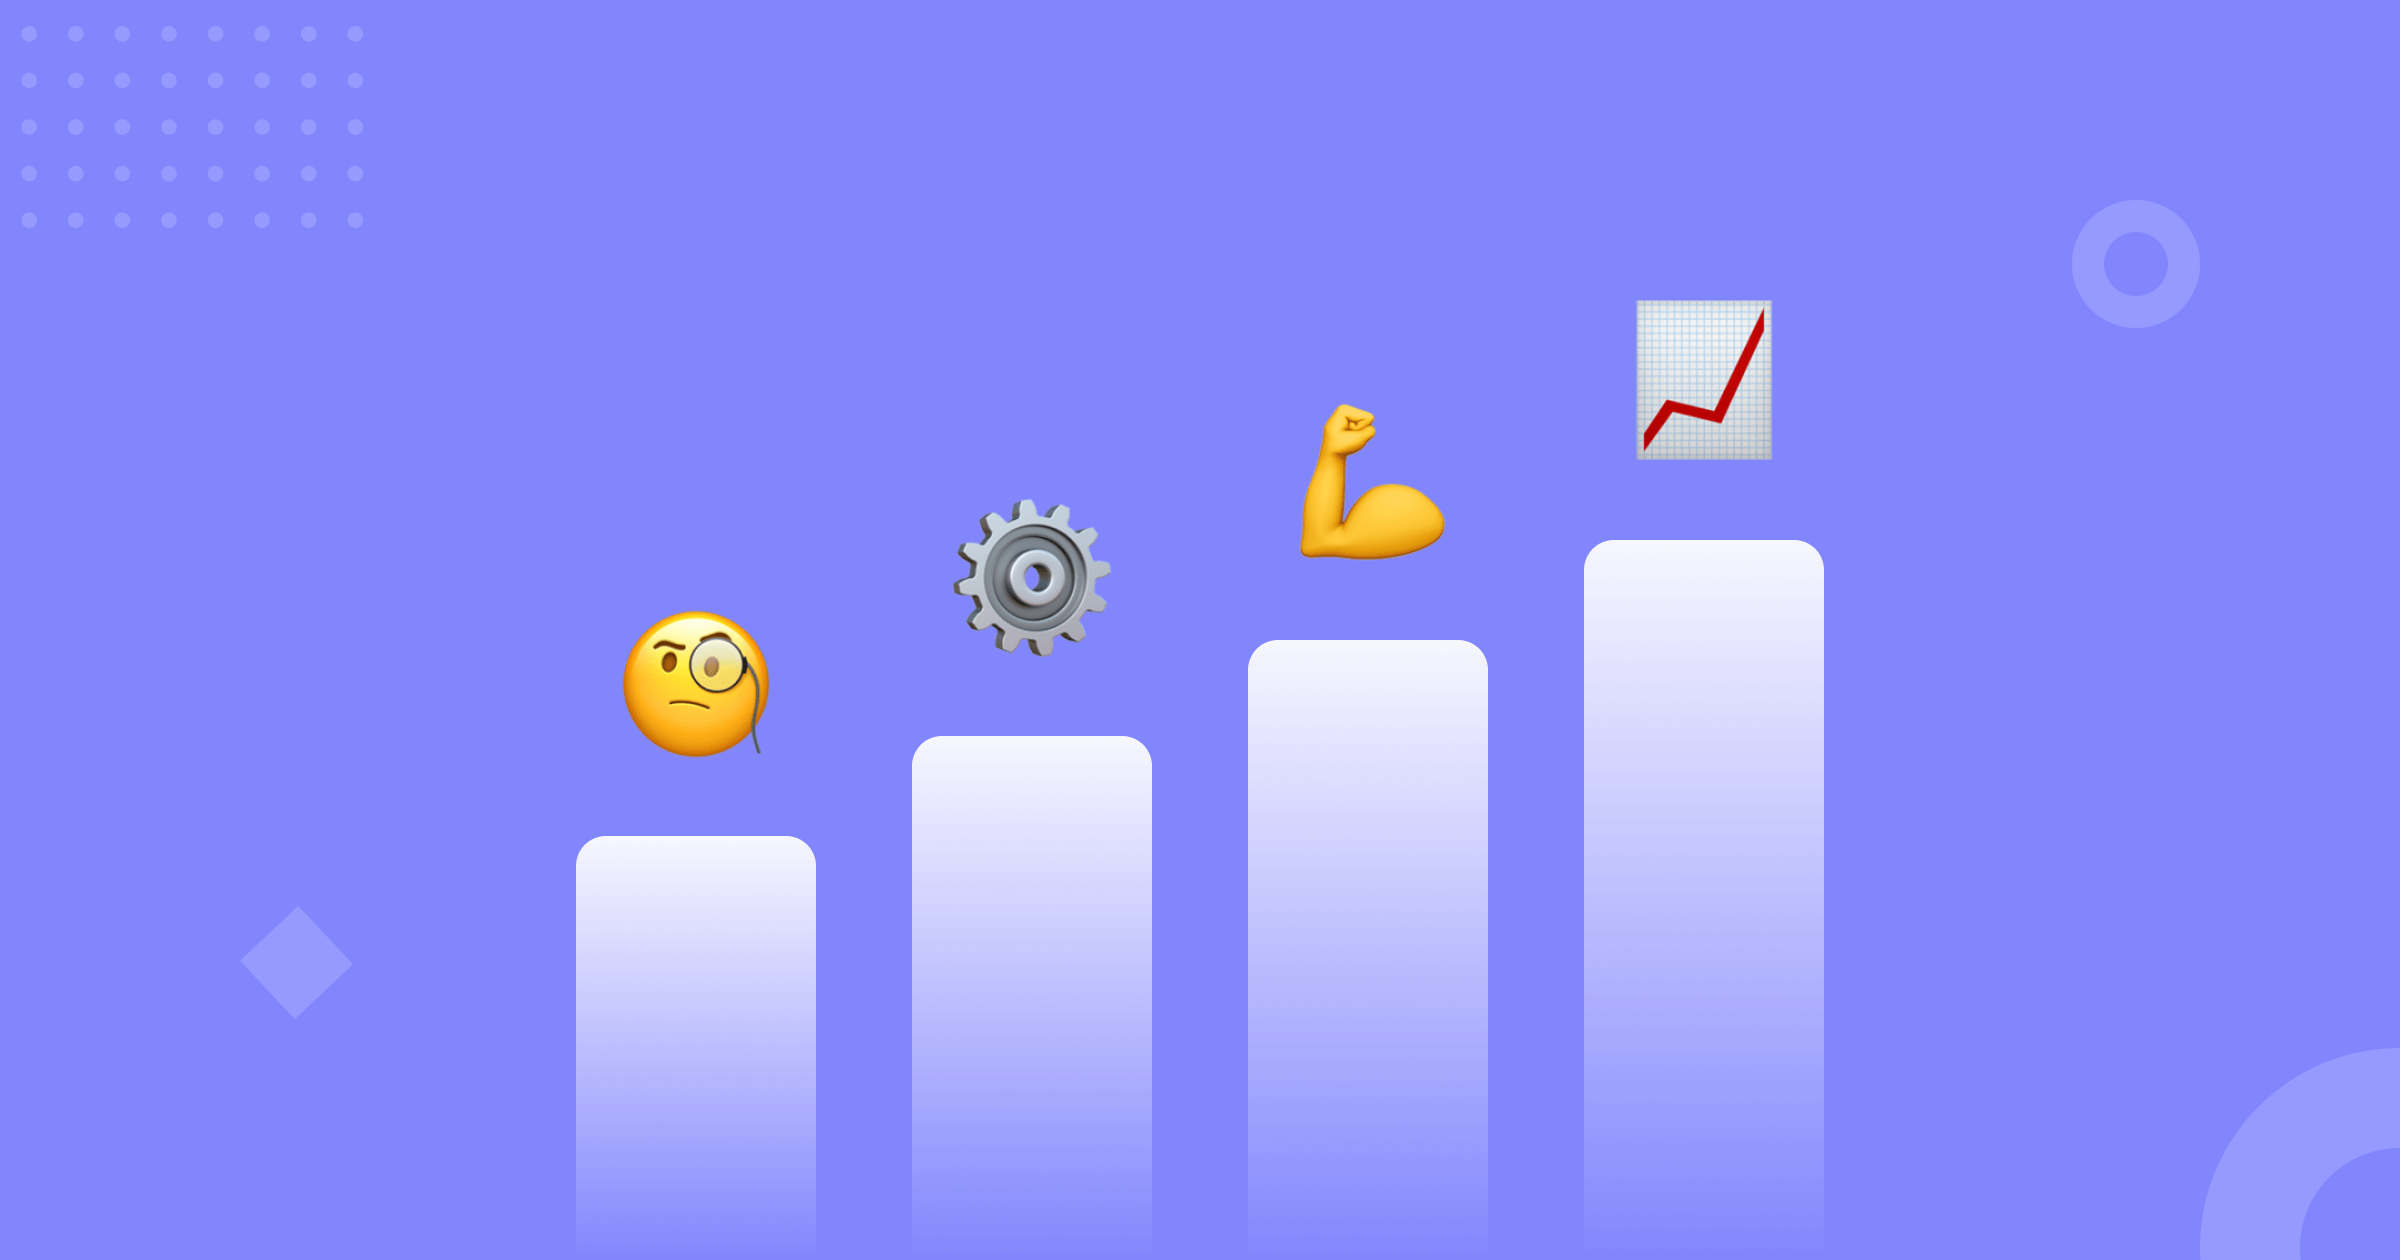 The four stages of CRO maturity represented by emojis